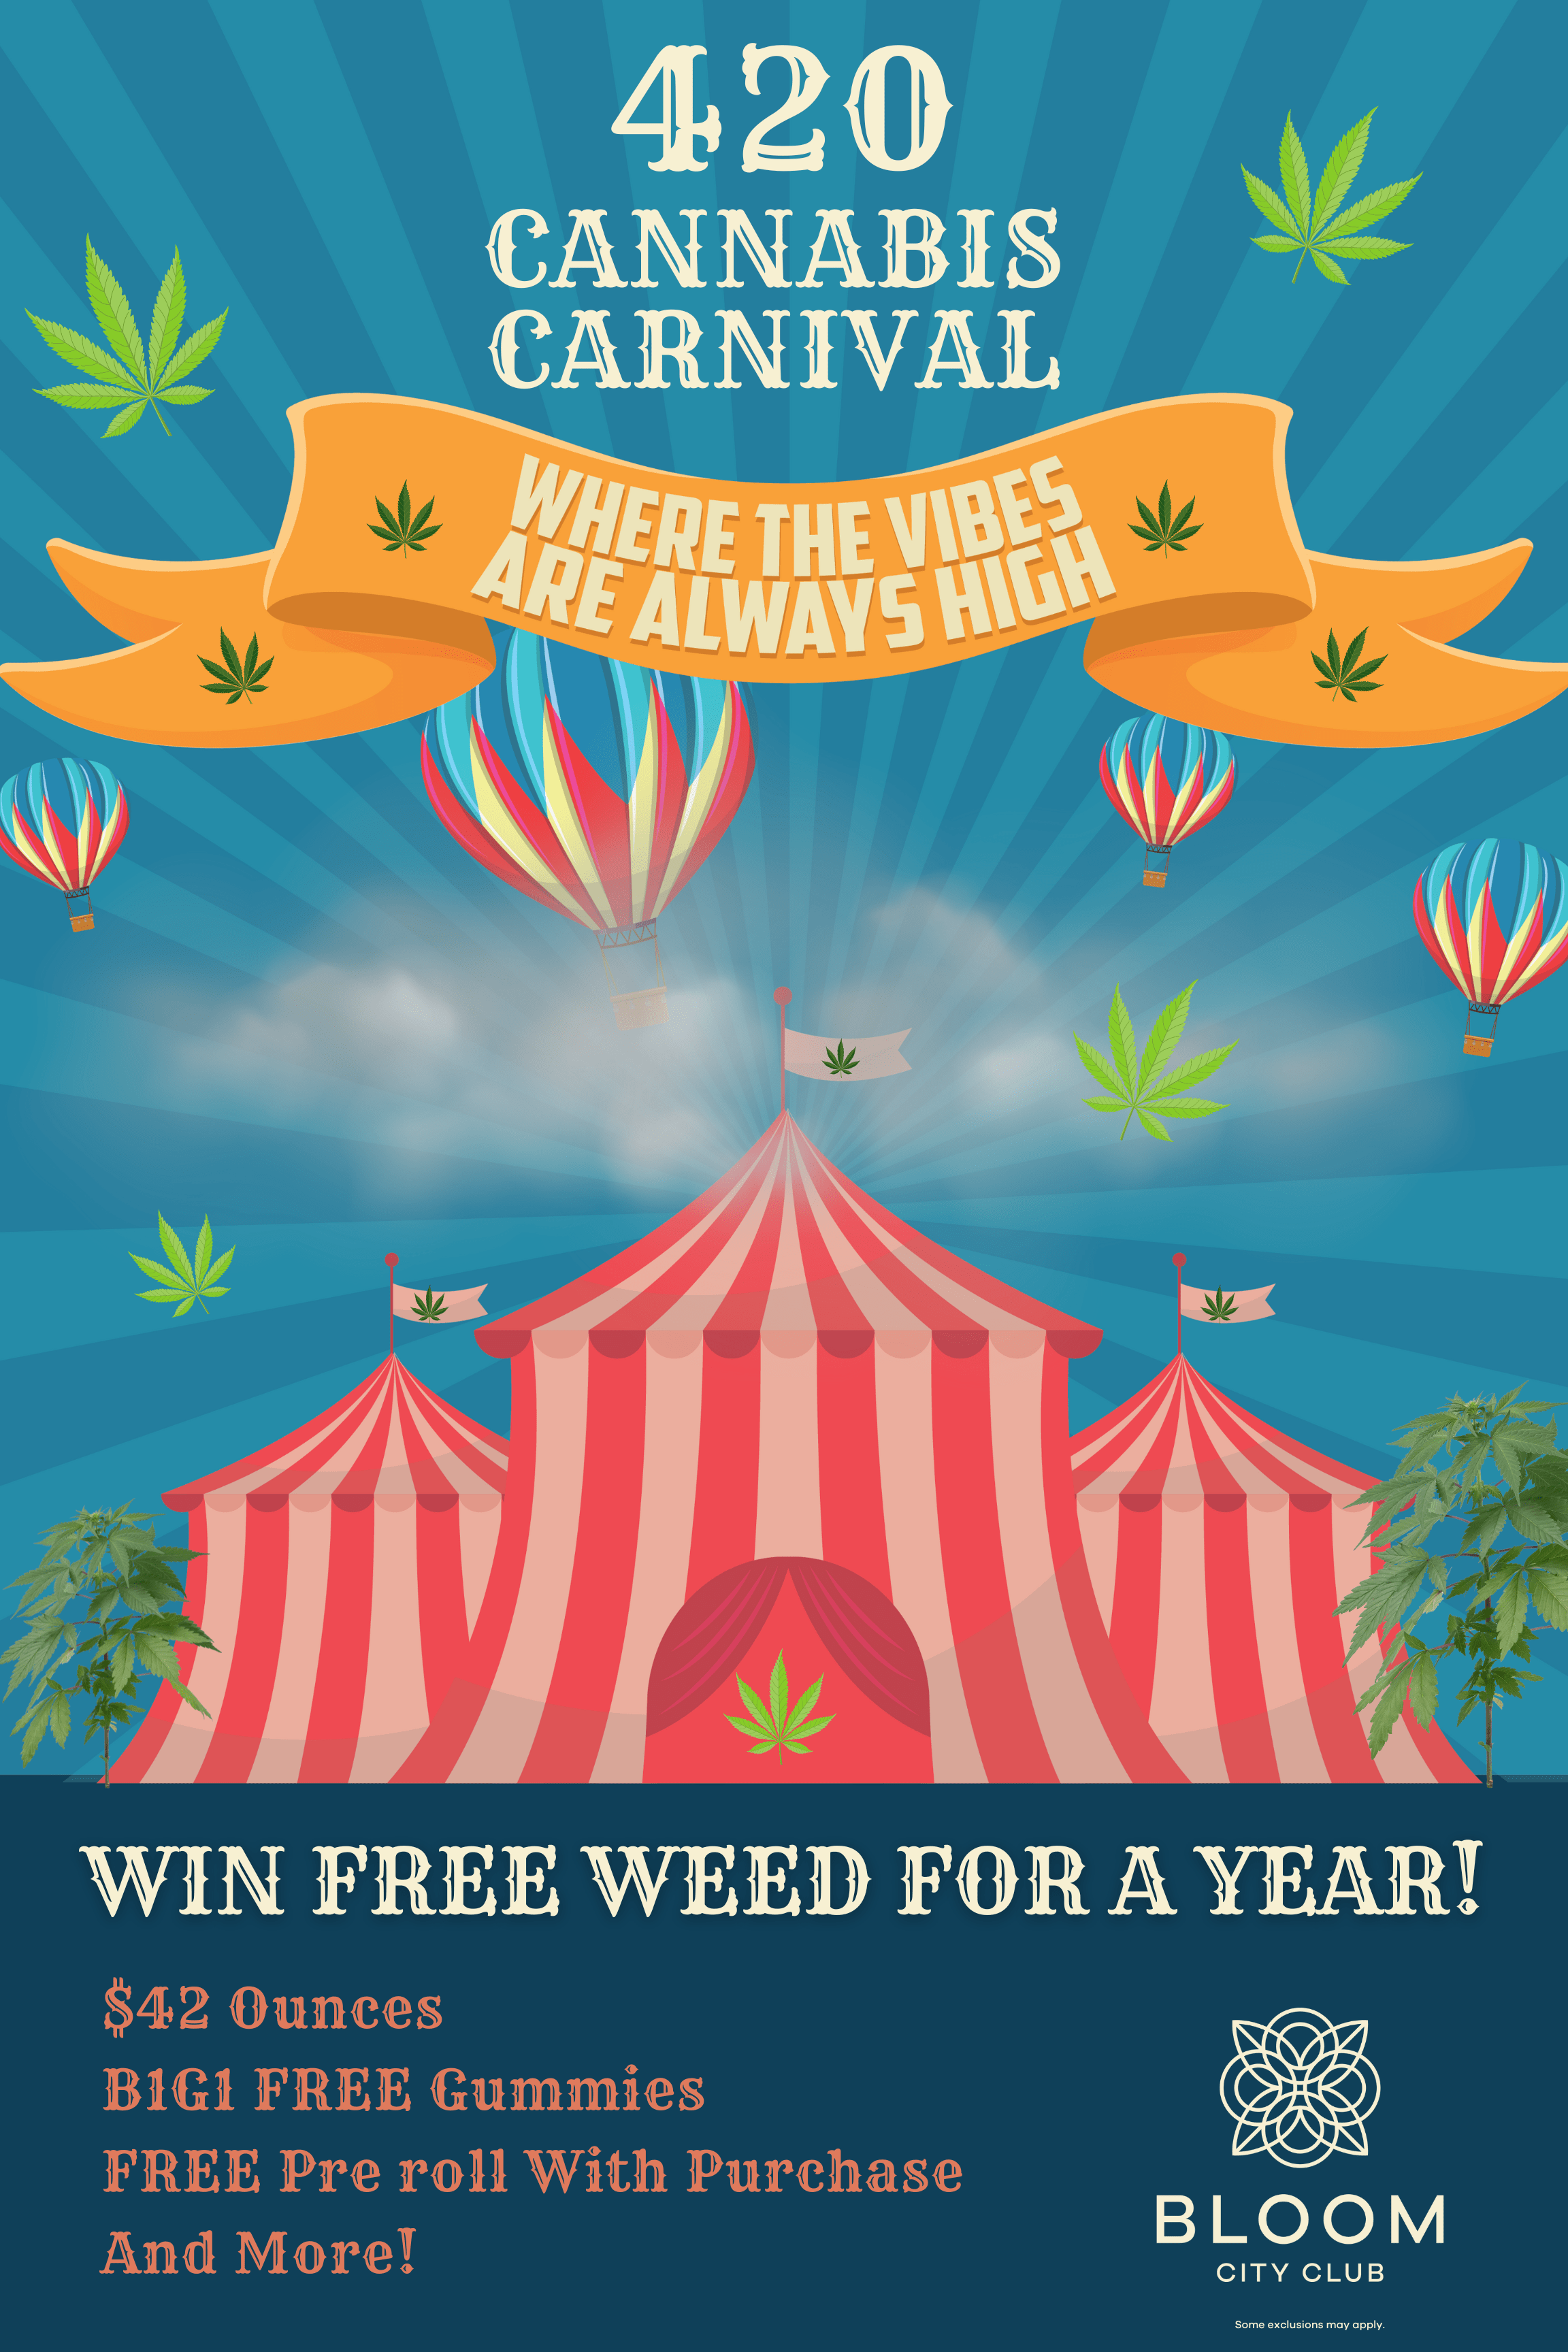 420 cannabis carnival deals free weed